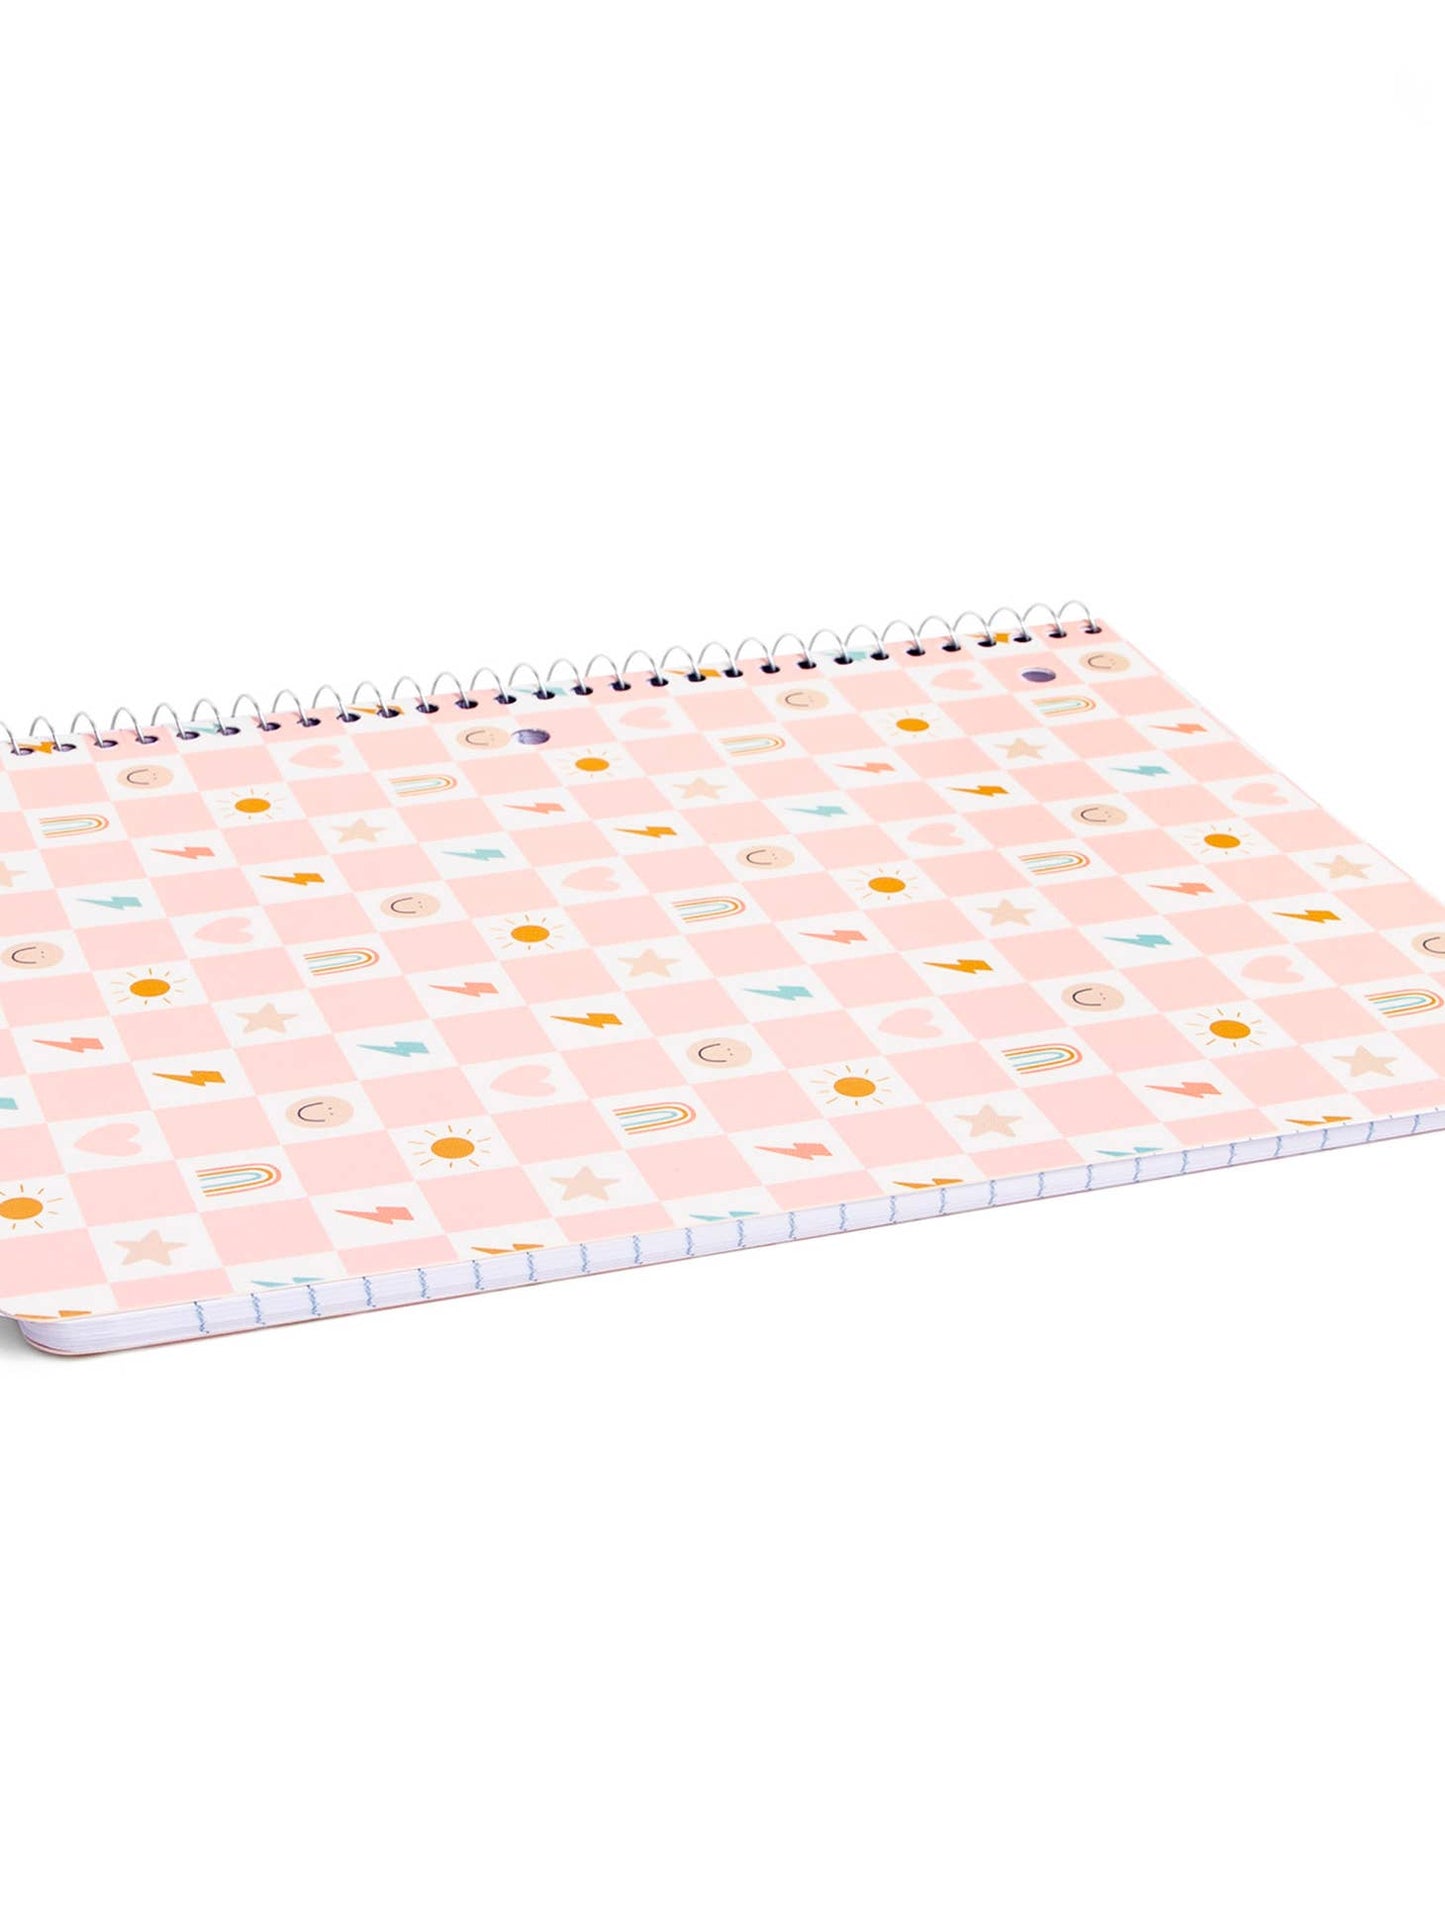 Checkerboard Icons Spiral Notebook - Favorite Little Things Co